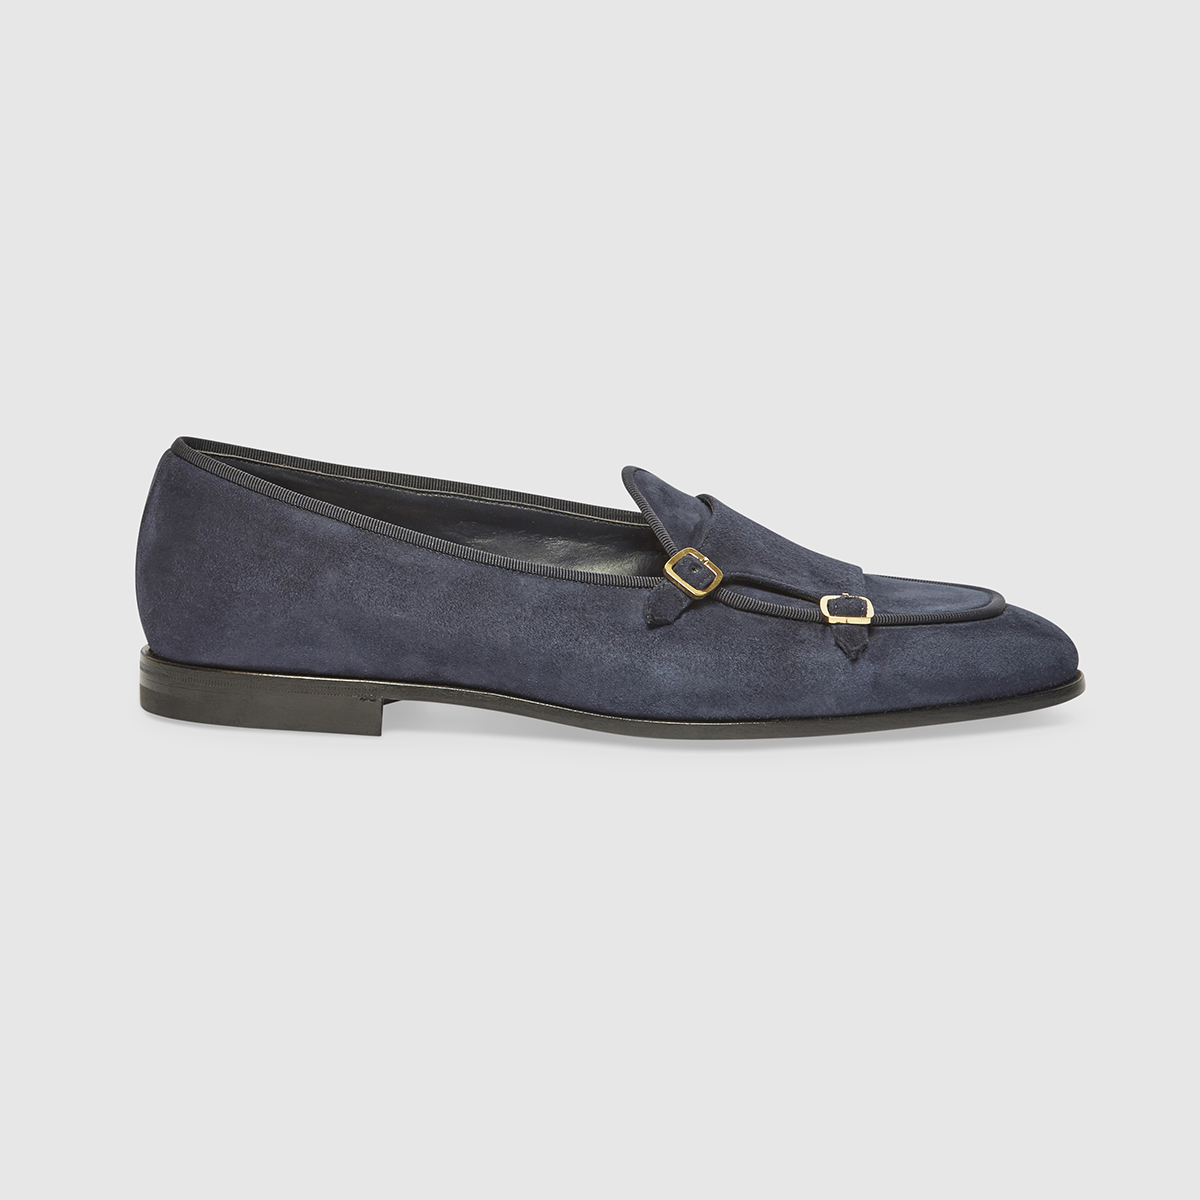 Double Monk Shoes in Denim Color Calf Leather Gruppo Fabi on sale 2022